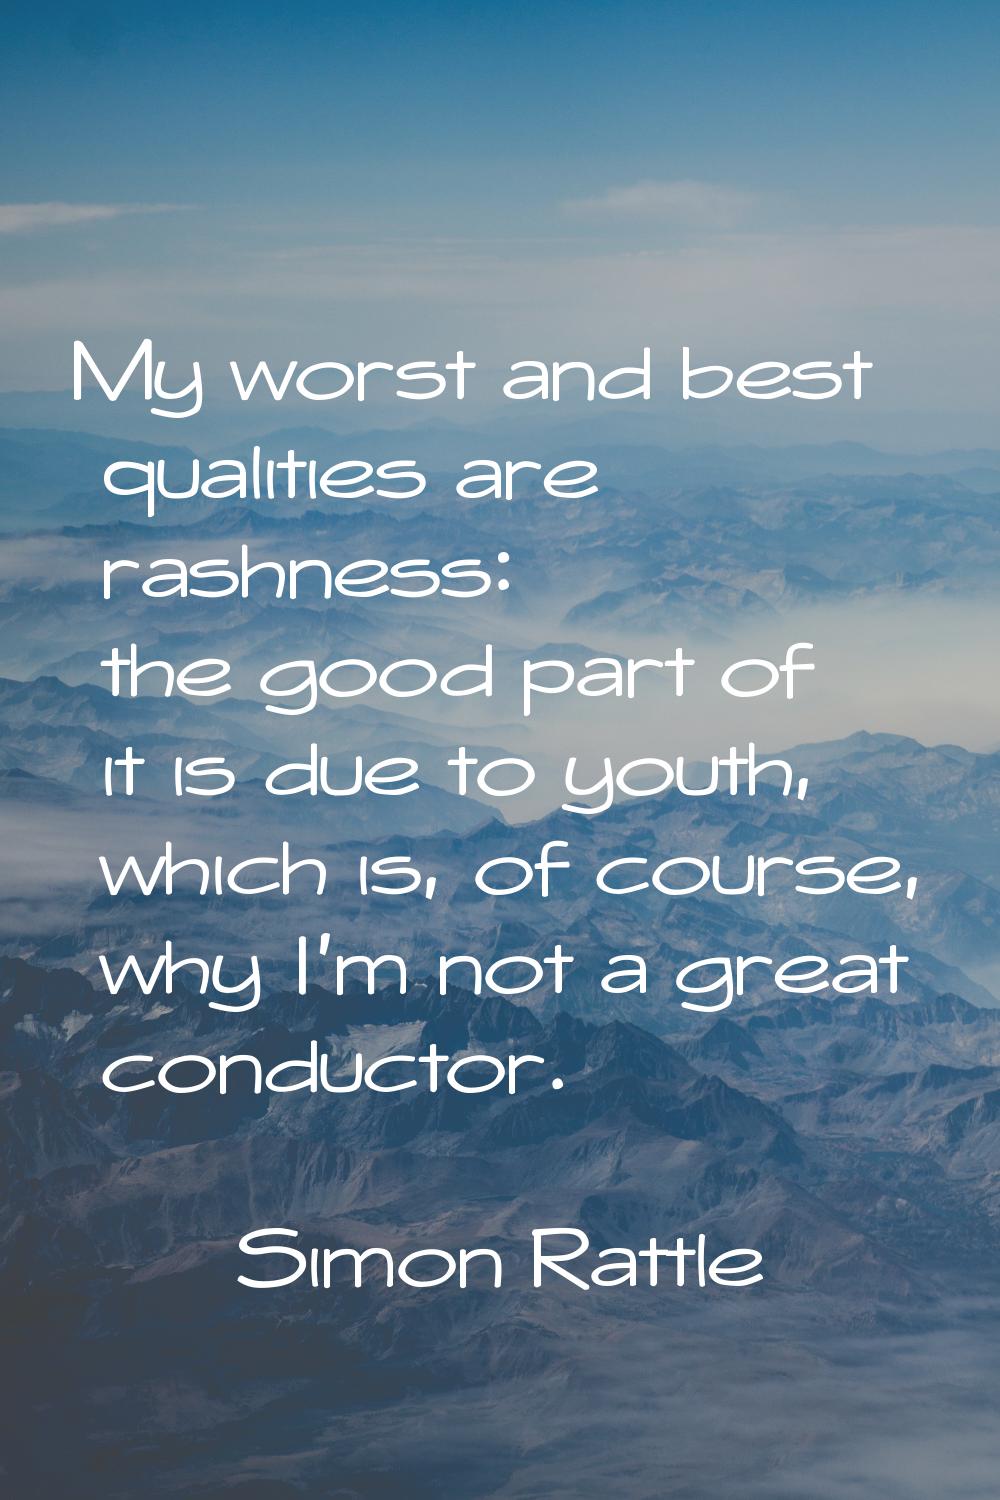 My worst and best qualities are rashness: the good part of it is due to youth, which is, of course,